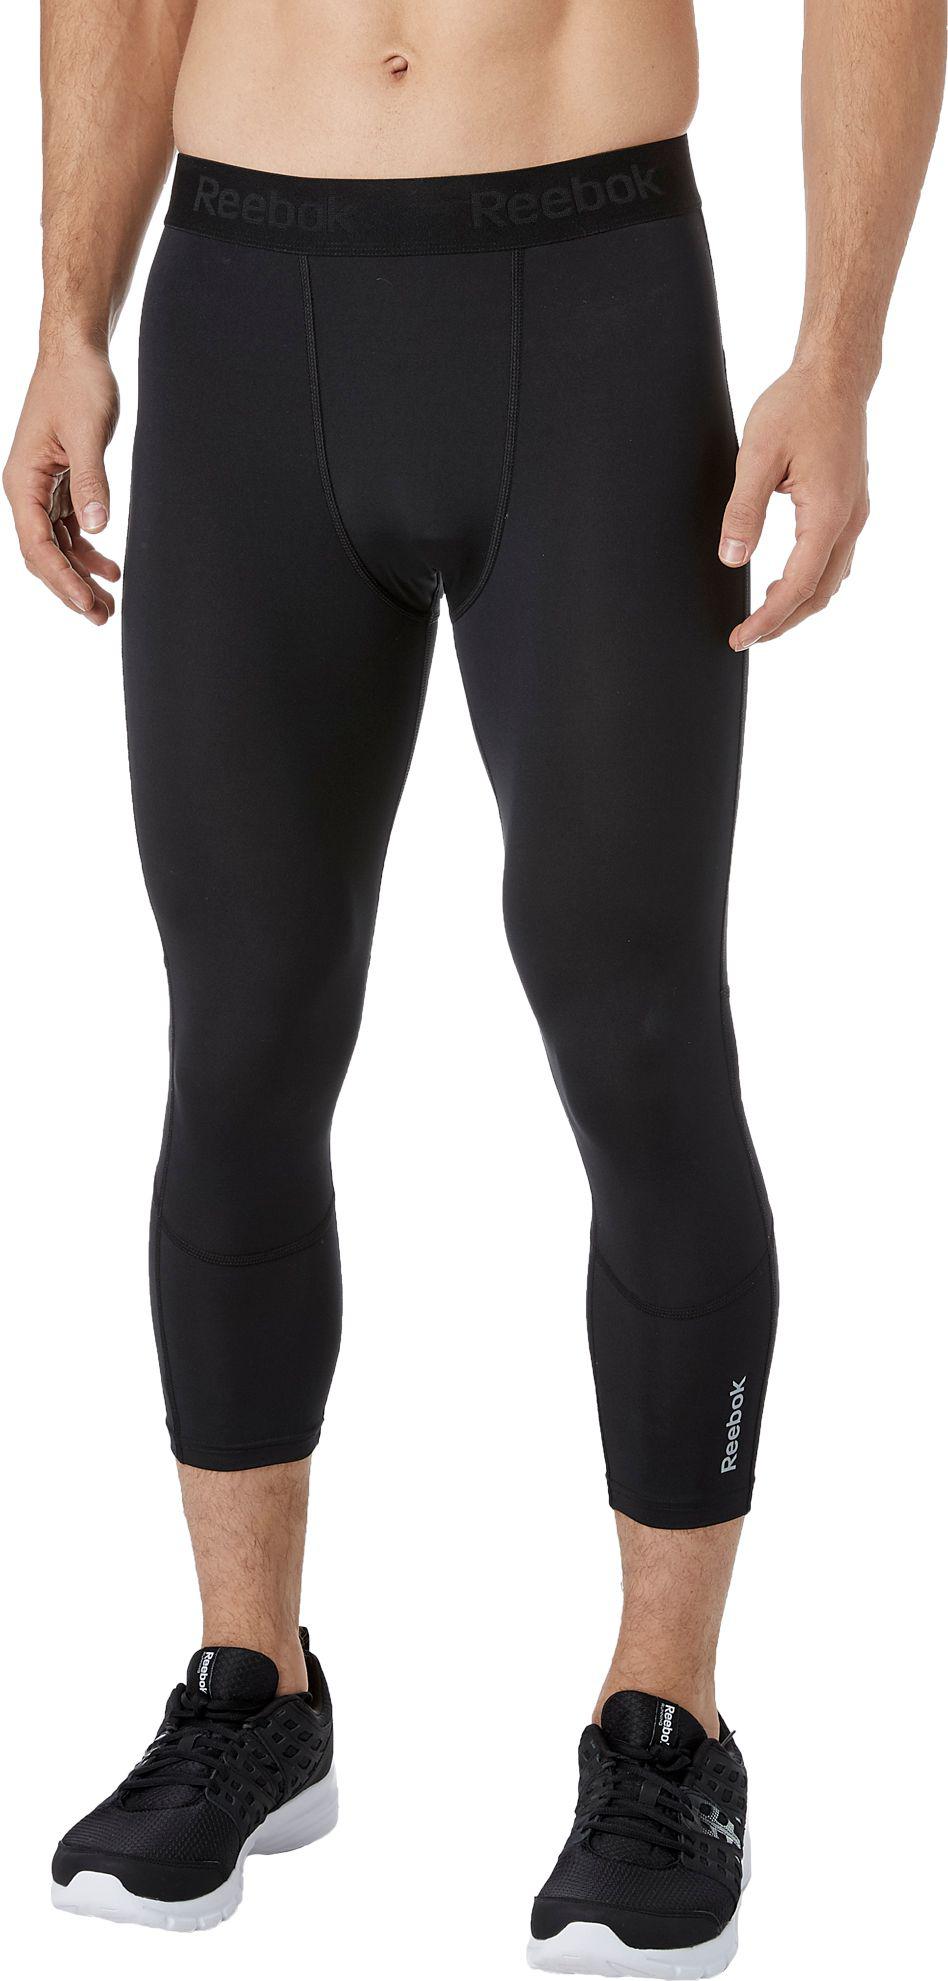 Reebok Synthetic 3/4 Compression Tights in Black for Men - Lyst